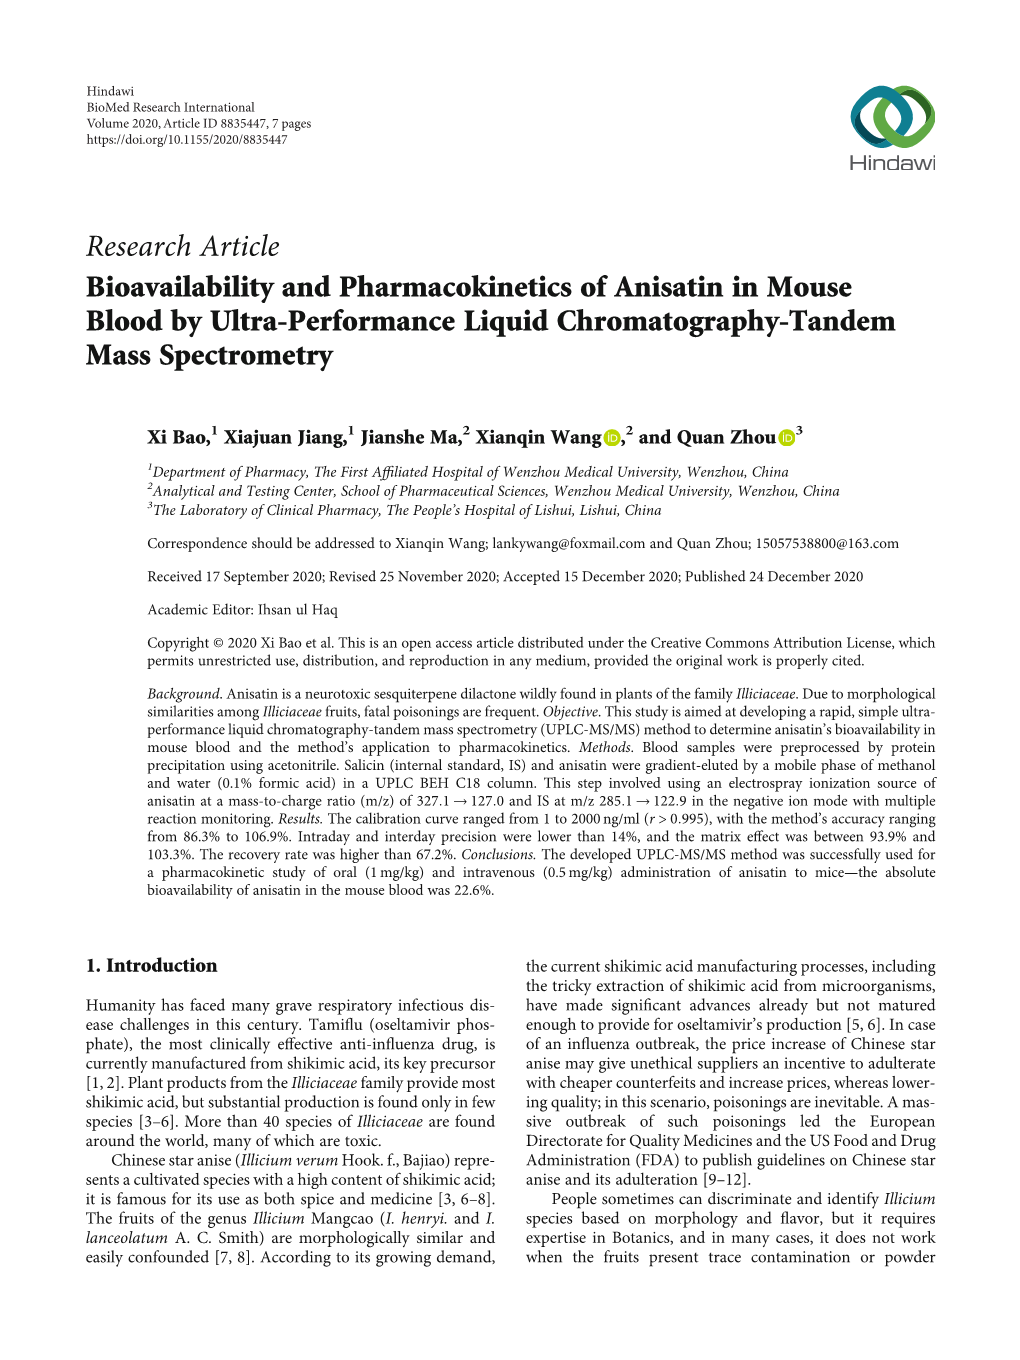 Bioavailability and Pharmacokinetics of Anisatin in Mouse Blood by Ultra-Performance Liquid Chromatography-Tandem Mass Spectrometry